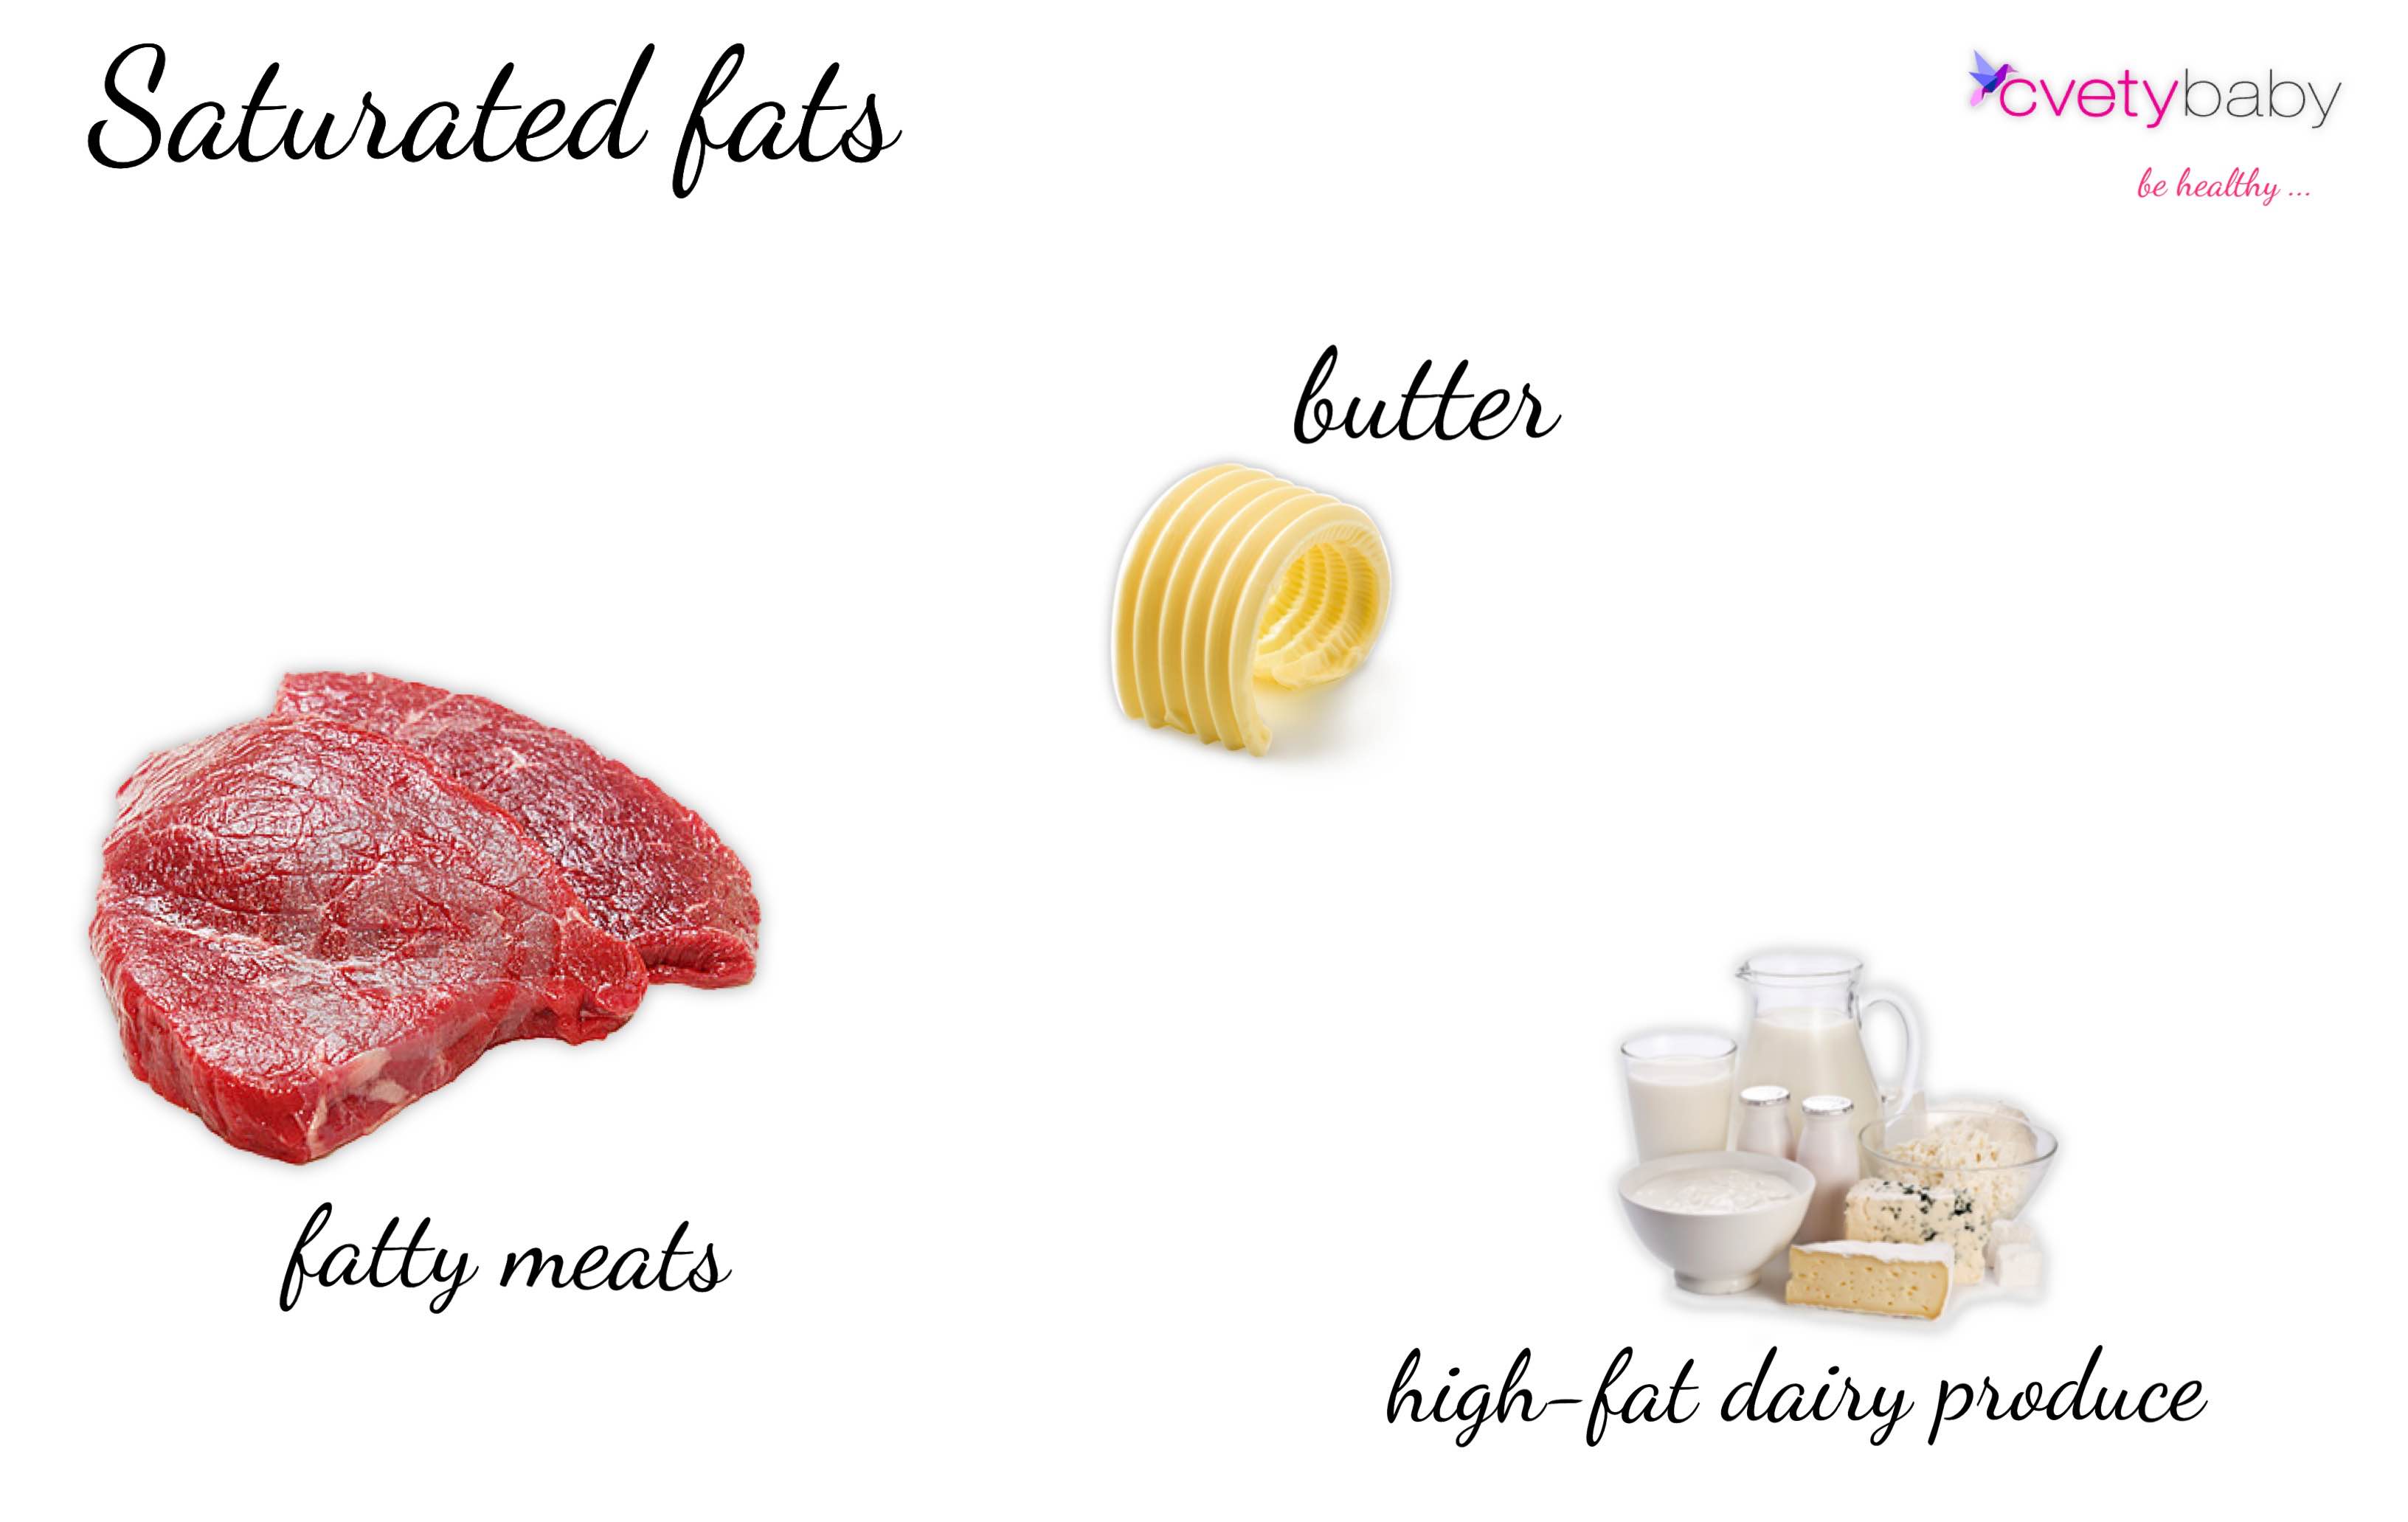 Saturated fats